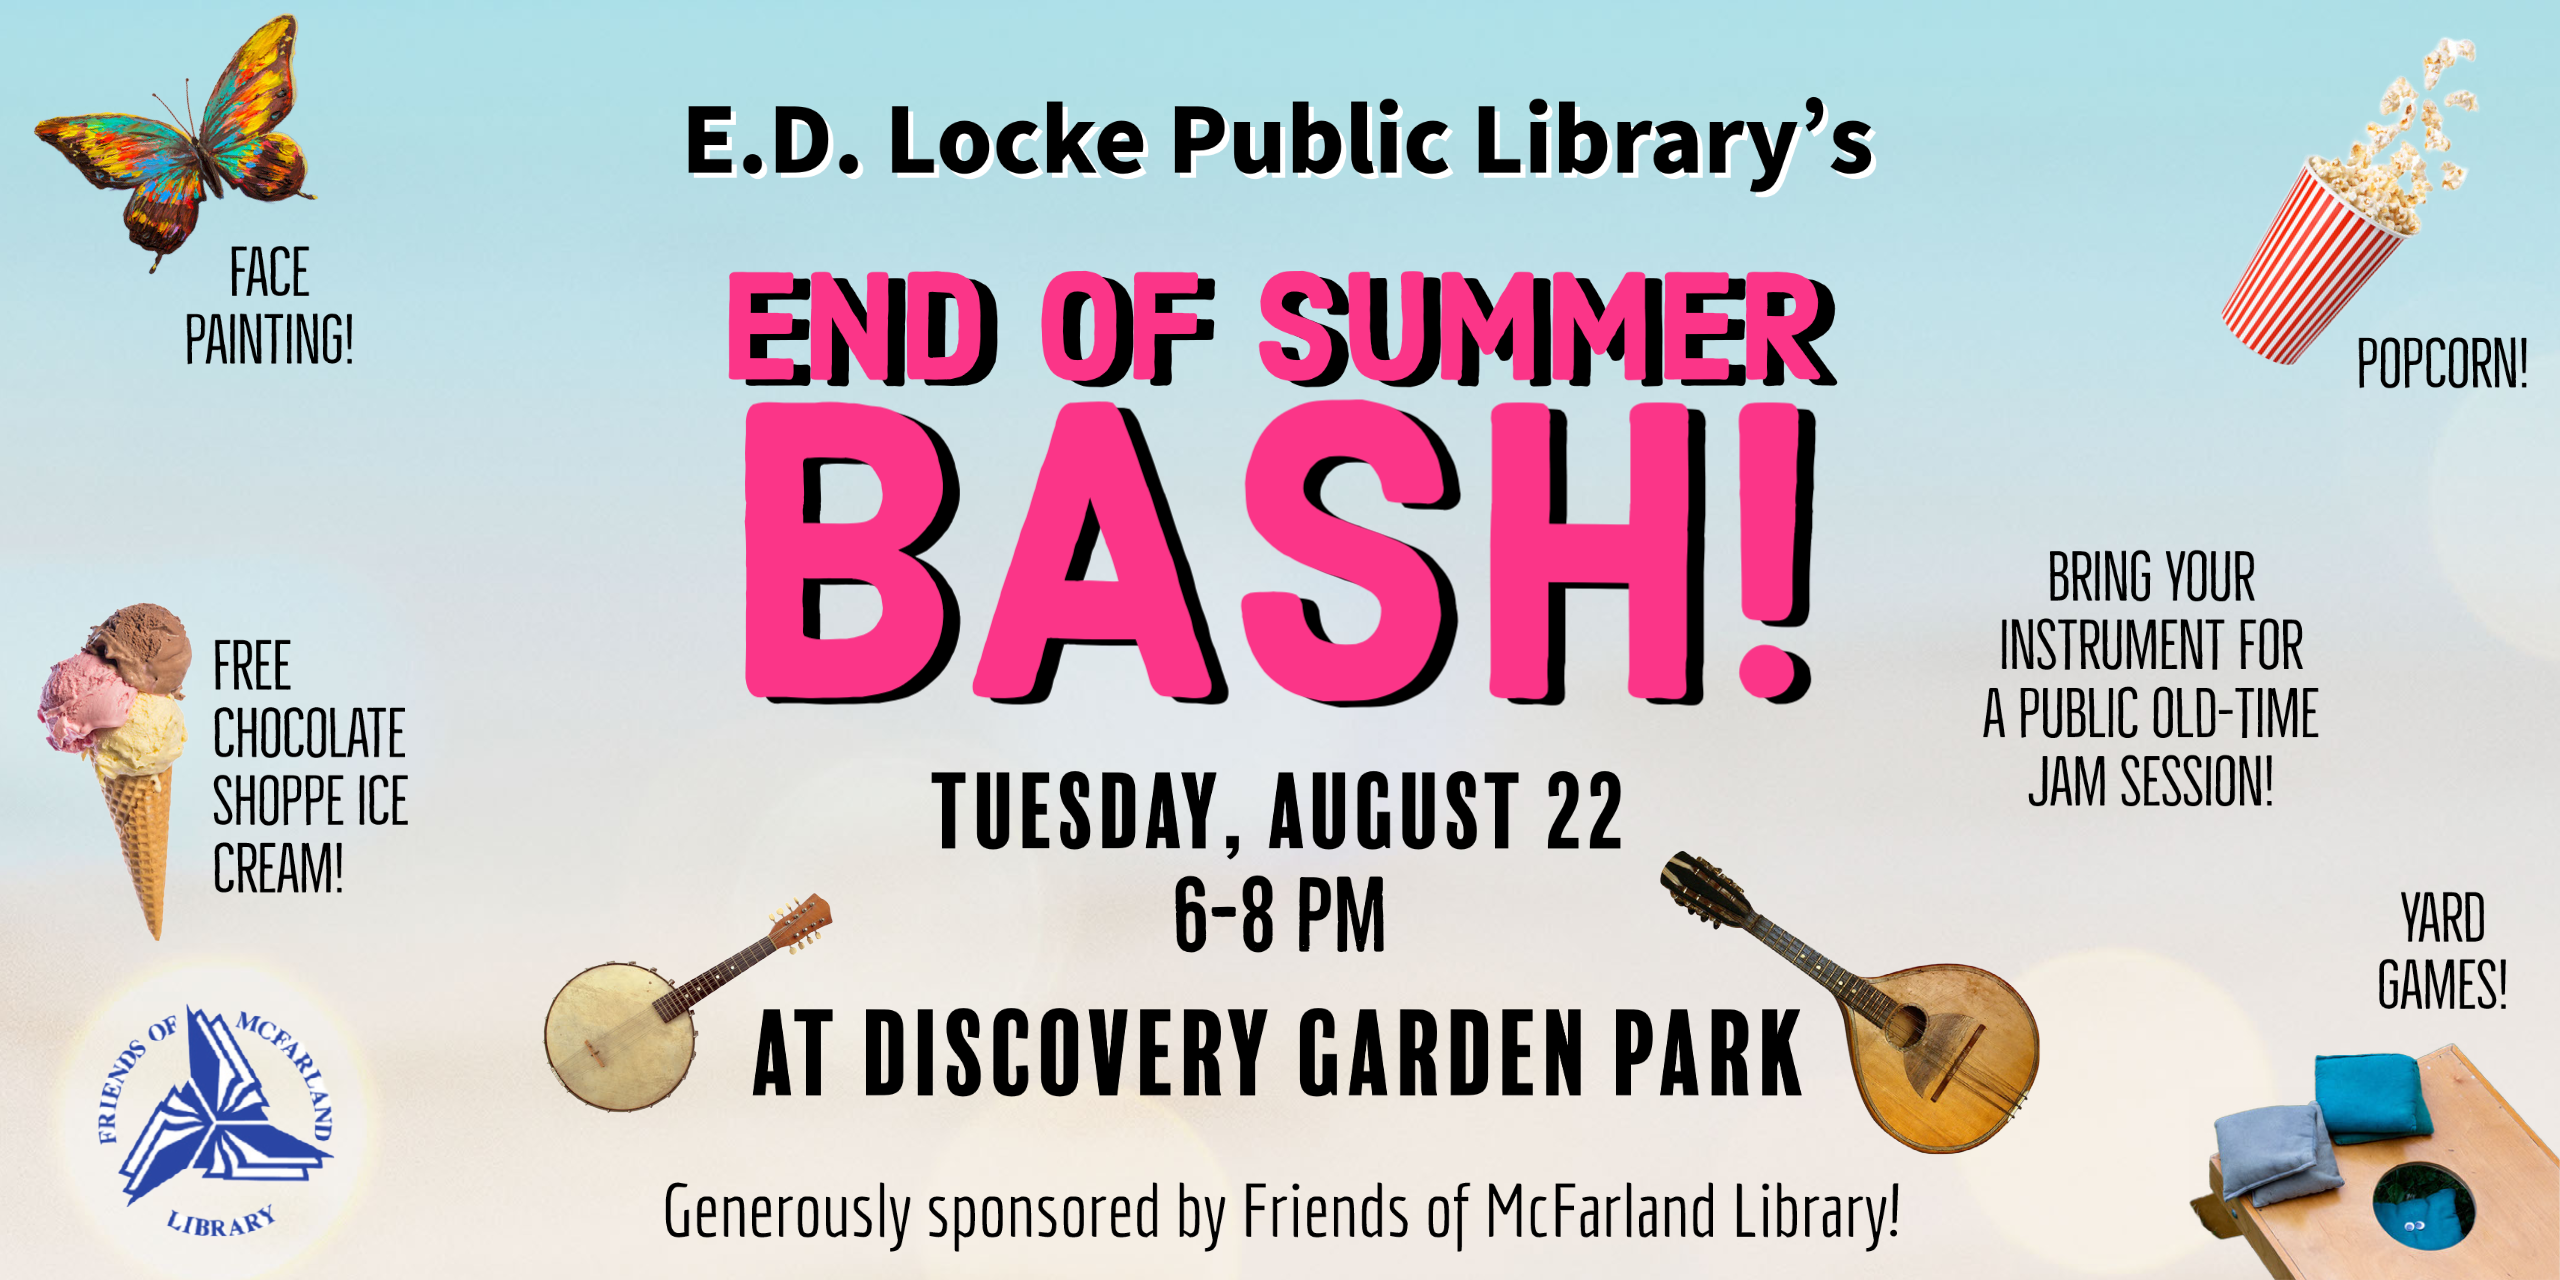 The end of summer bash will be held Tuesday, August 22 from 6-8 PM.  It will be at the Discovery Garden Park outside of E.D. Locke Public Library.  Join us for popcorn, lawn games, face painting, Chocolate Shoppe Ice Cream, and "old time" open jam session.